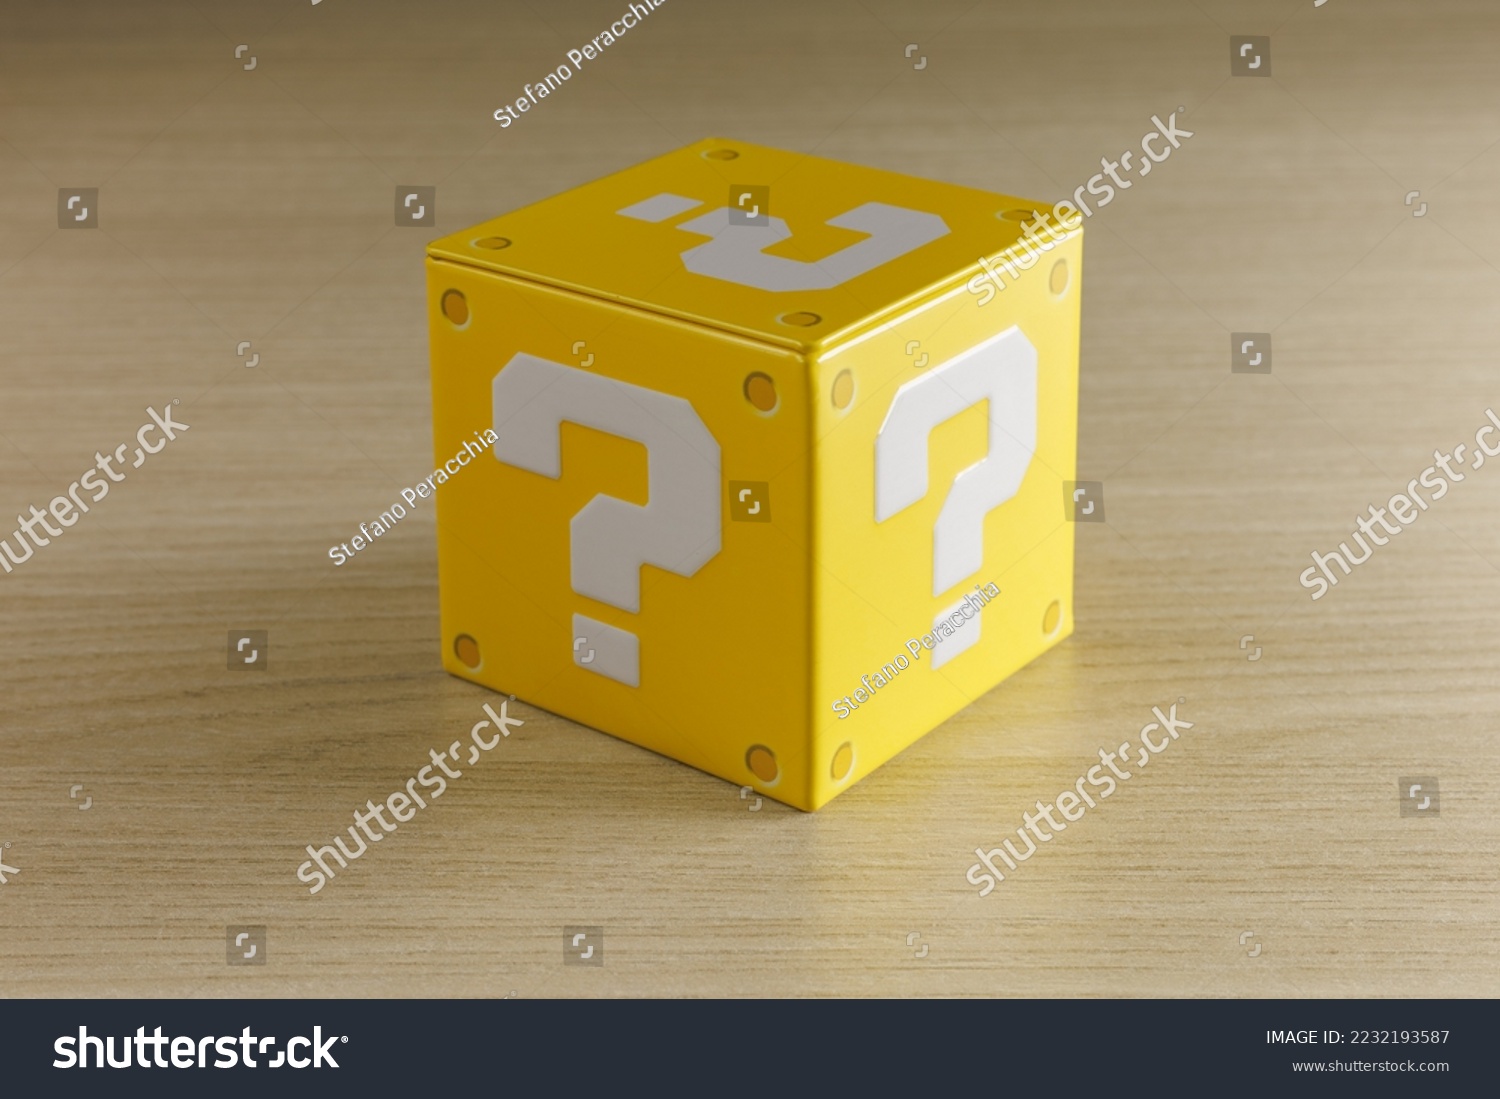 Indoor still-life photo of a little yellow box with a big white question mark printed on each face. It recalls a graphic element of a famous platform video game. #2232193587